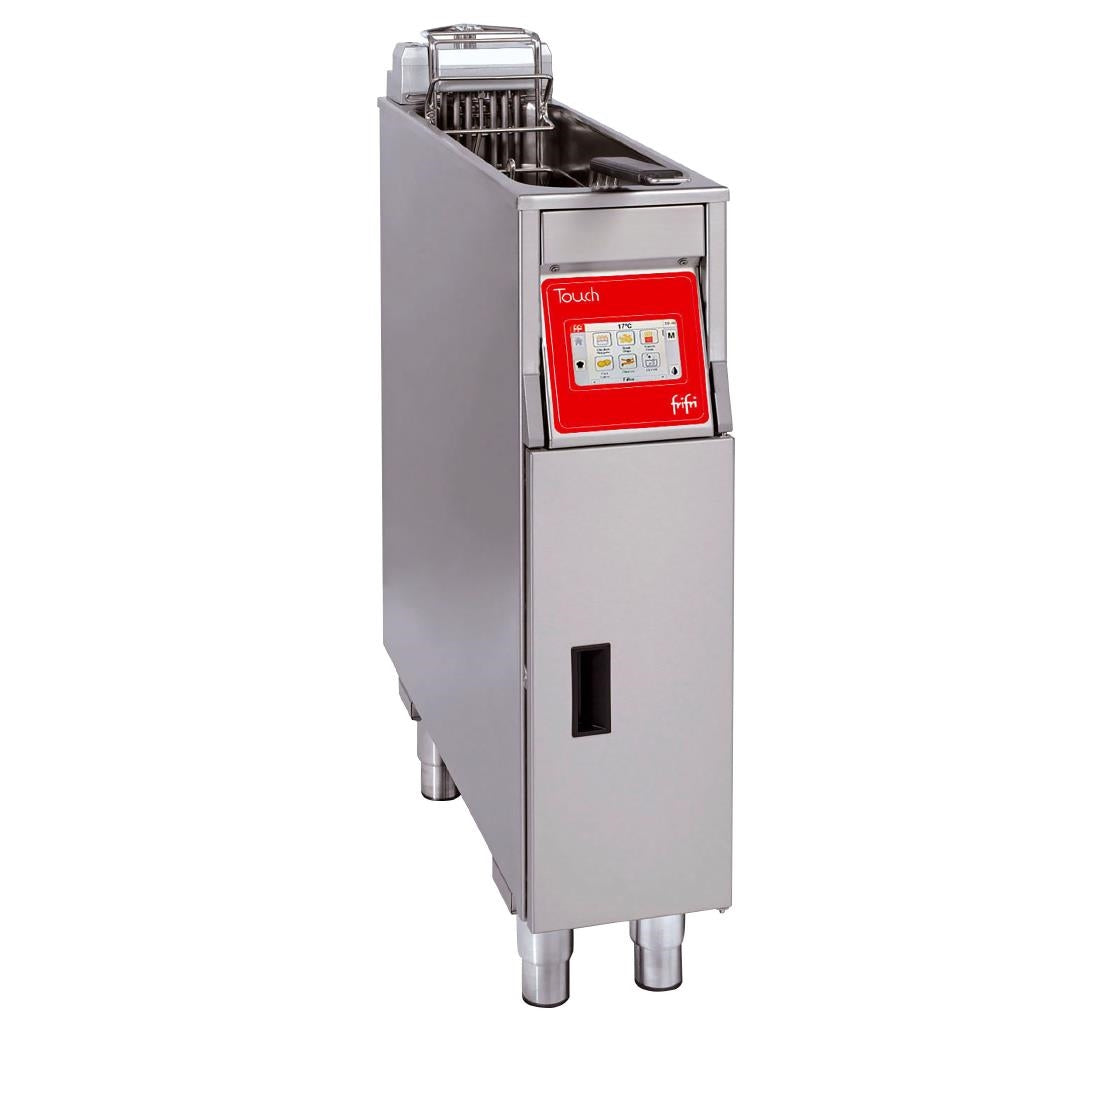 HS001-3PH FriFri Touch 211 Electric Free-Standing Single Tank Fryer 1 Basket 7.5kW - Three Phase